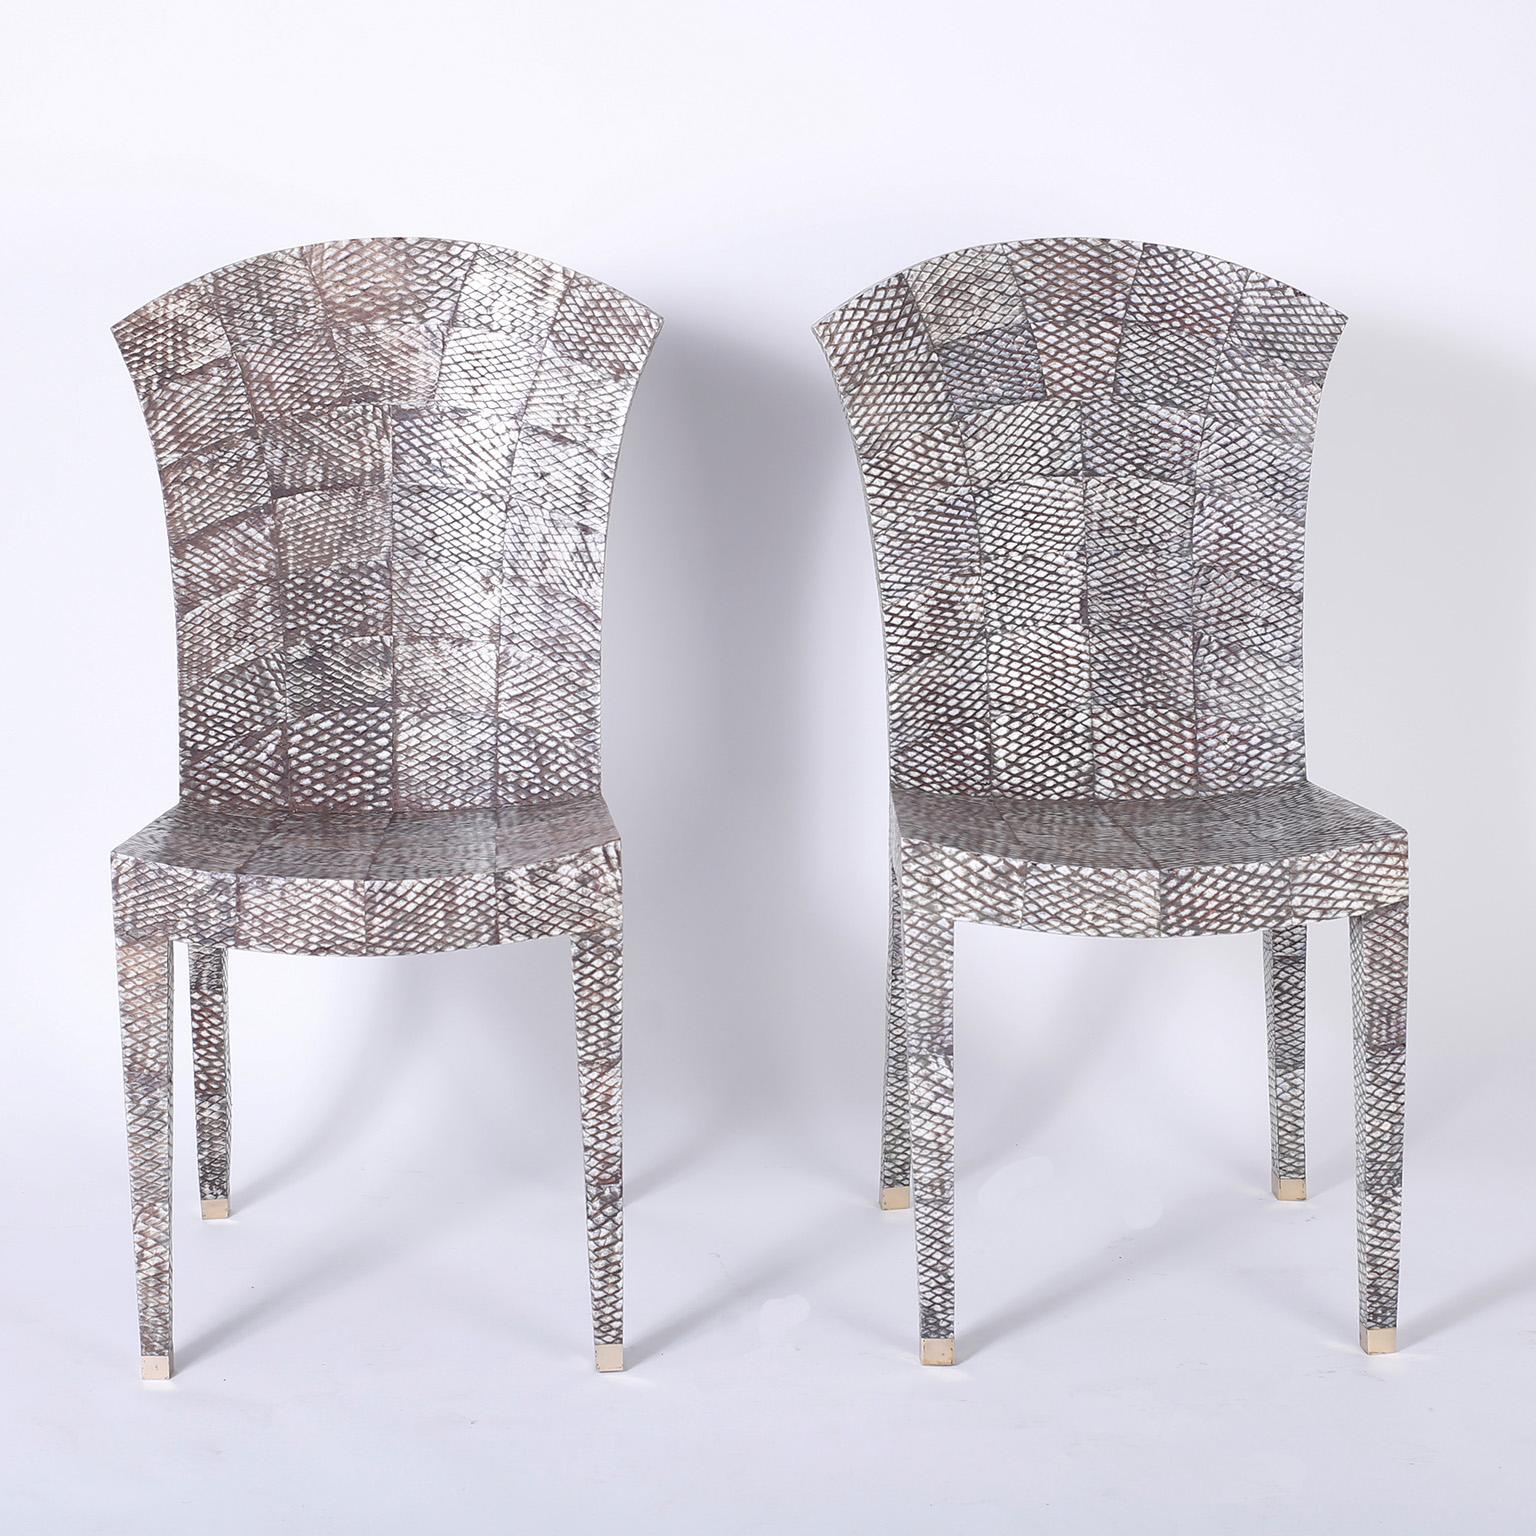 Chic pair of midcentury handmade wood dining chairs with a simple sleek form covered in shagreen or shark skin. Signed Maitland-Smith on the bottoms. Priced individually. .